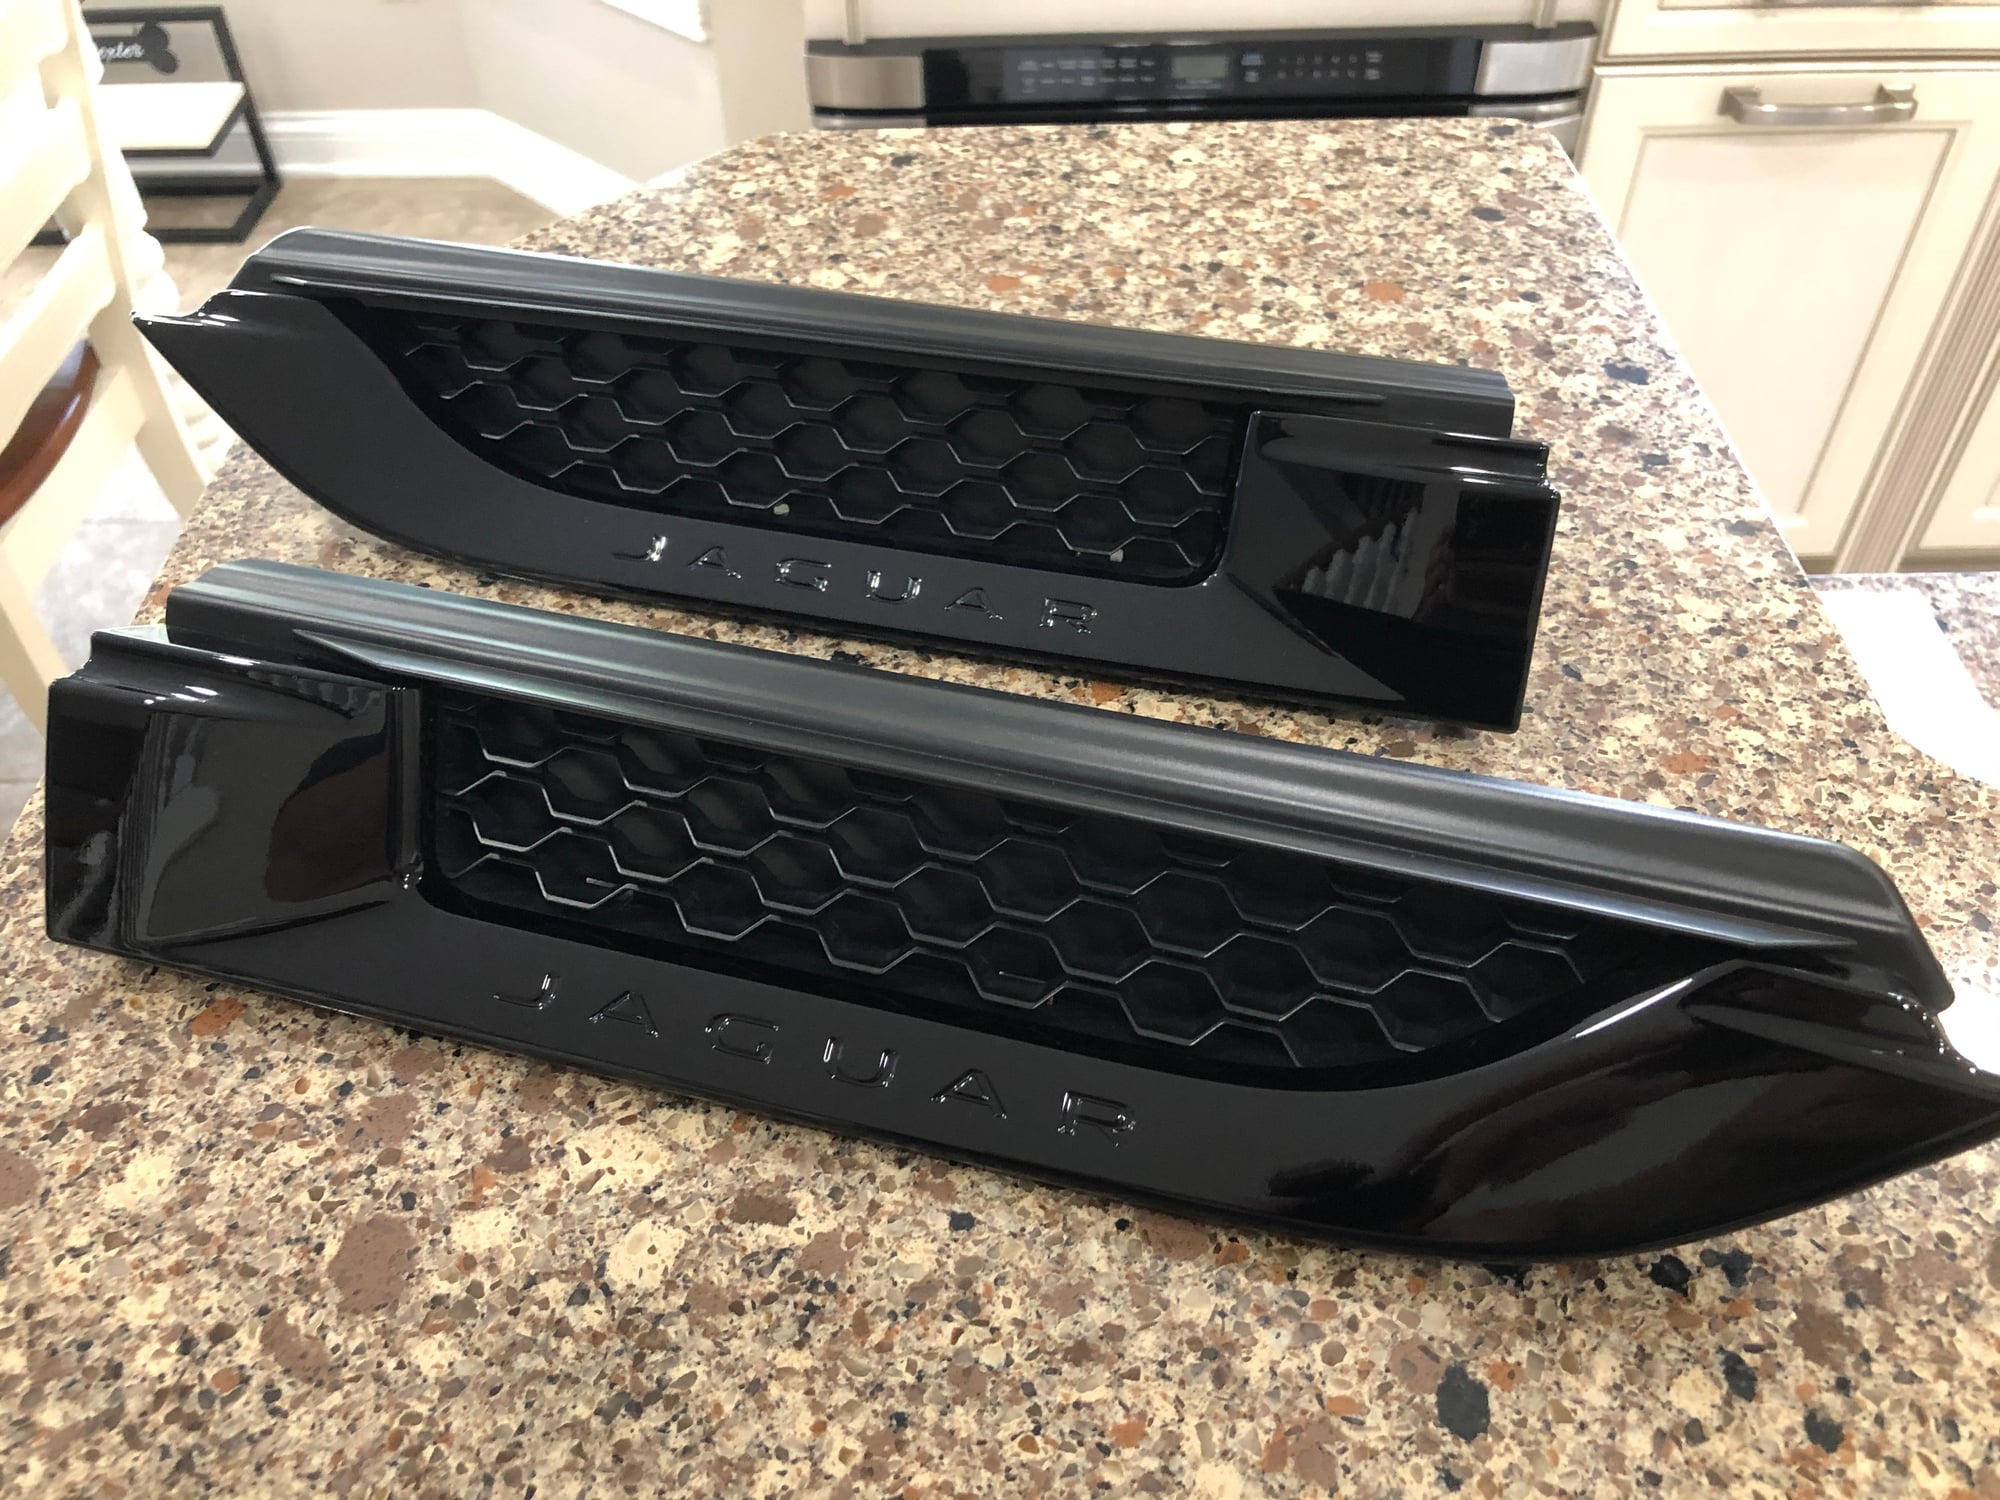 Accessories - F-type Gloss Black Power Vents Complete set - 1 pair Free Shipping - Used - Fishers, IN 46037, United States